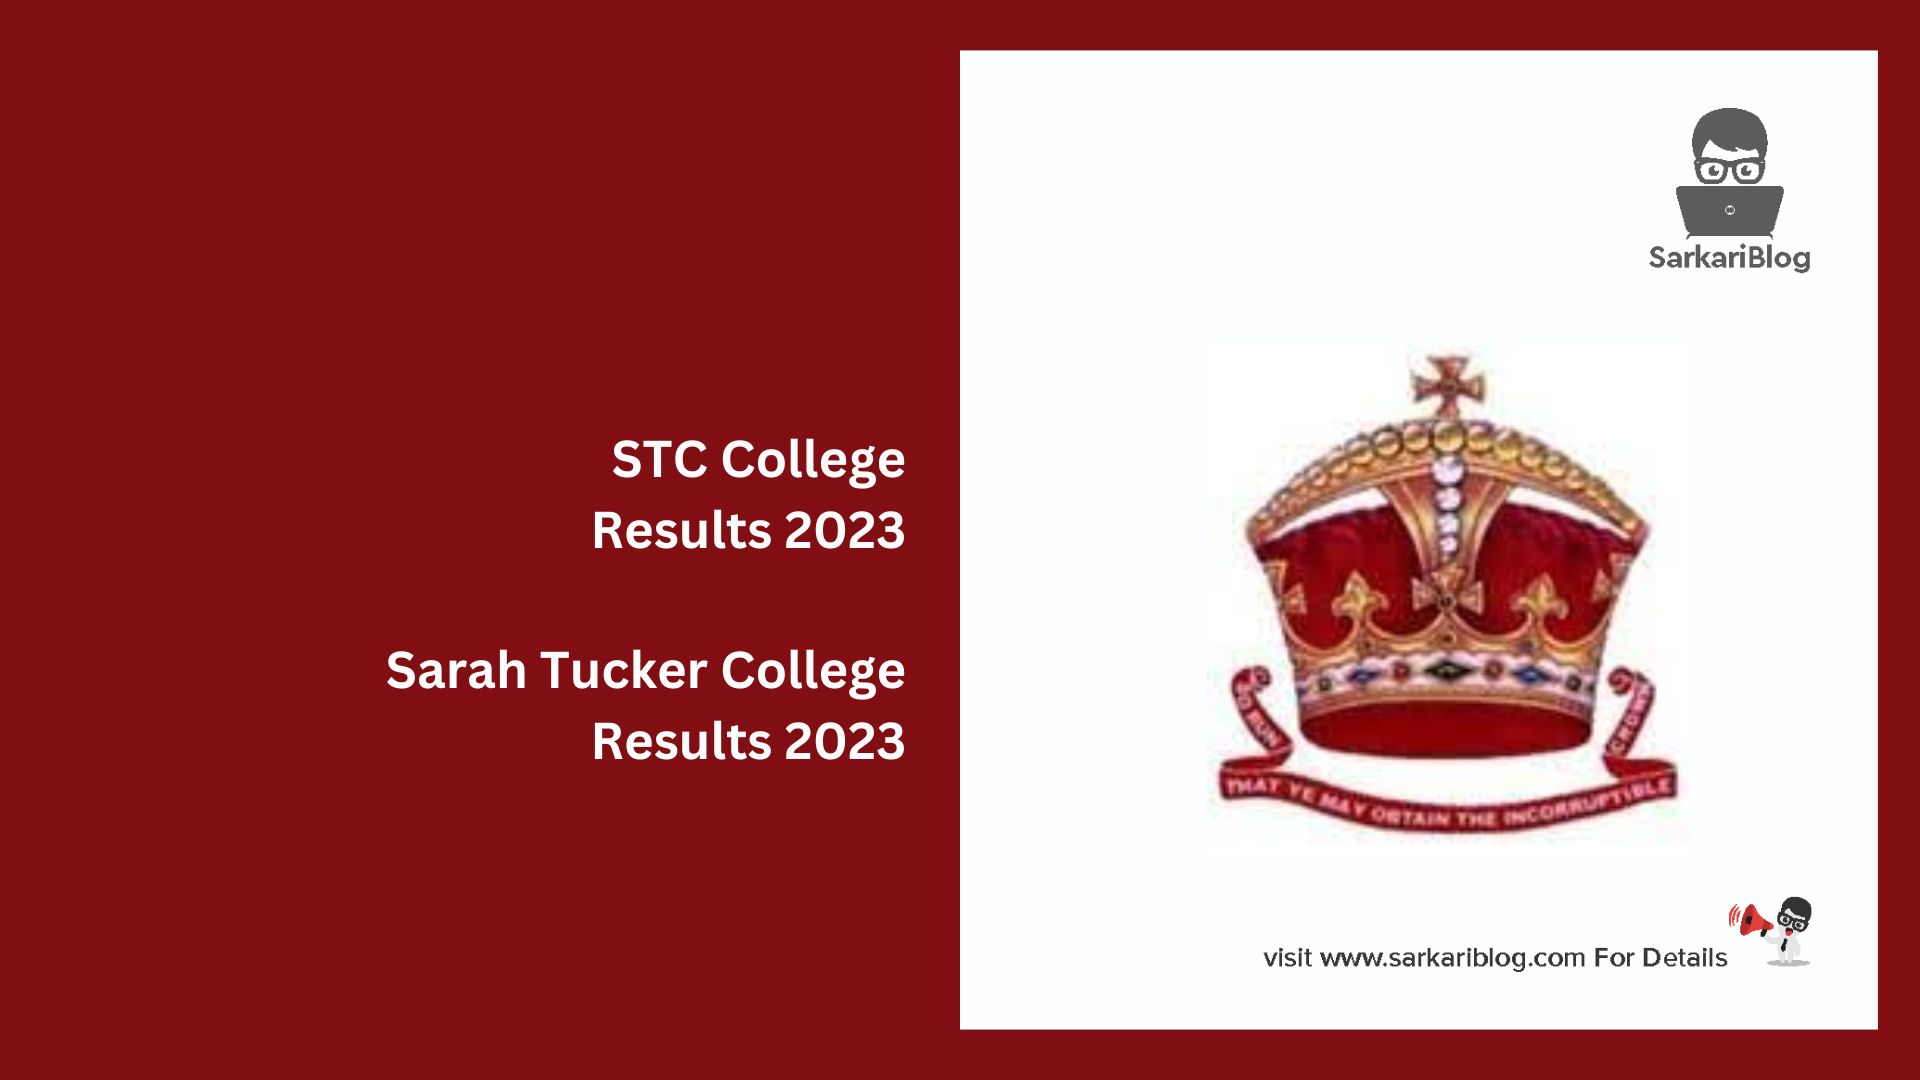 STC College Results 2023